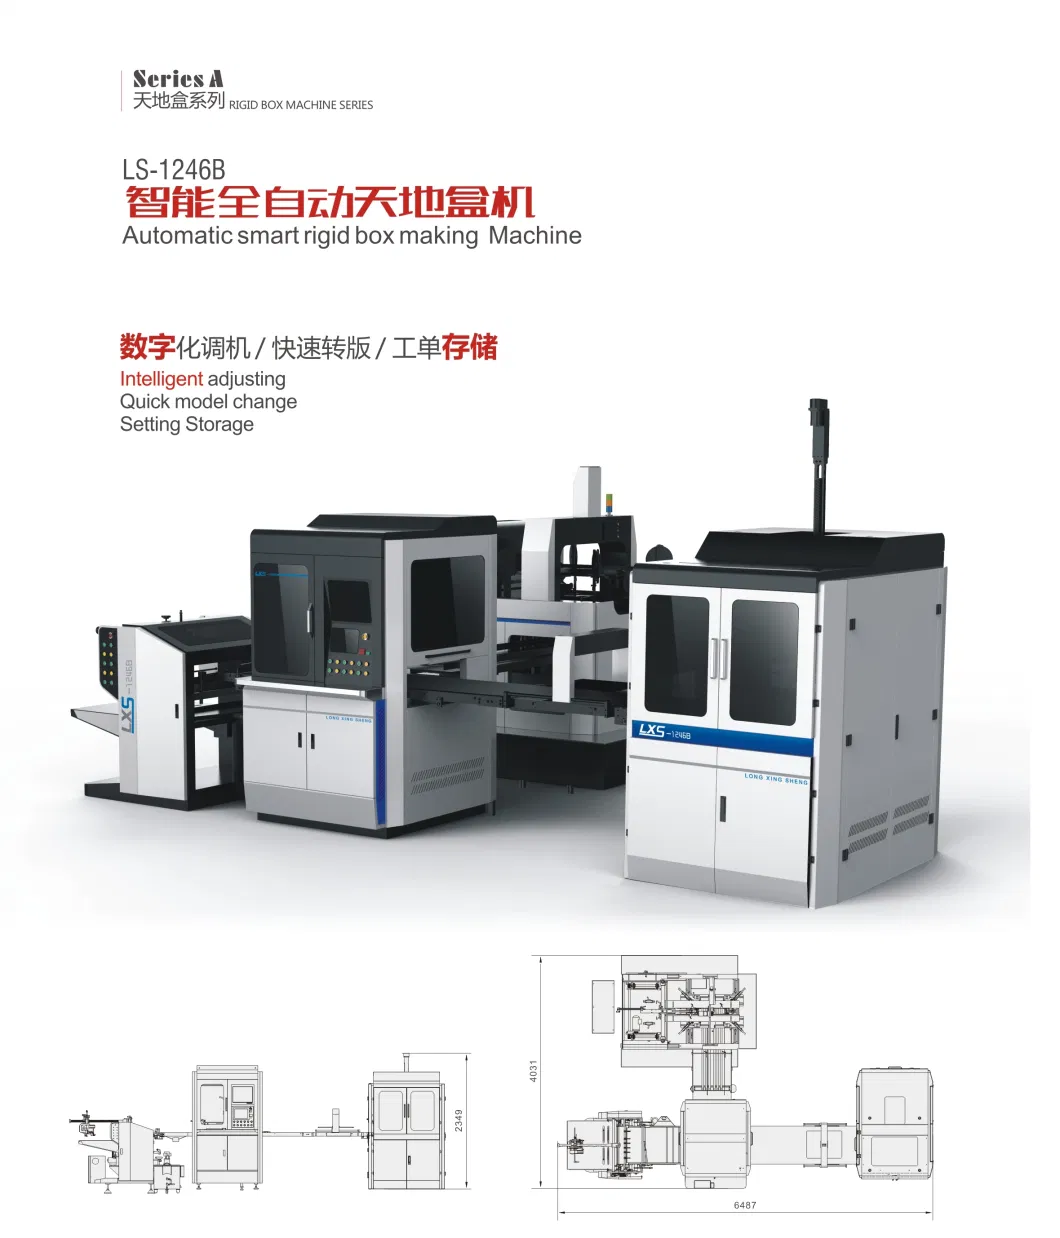 Application of Automatic Smart Rigid Box Making Machinequickly Job Setting No Need to Change Air Pressing Plate No Need to Change Tuck in Blade